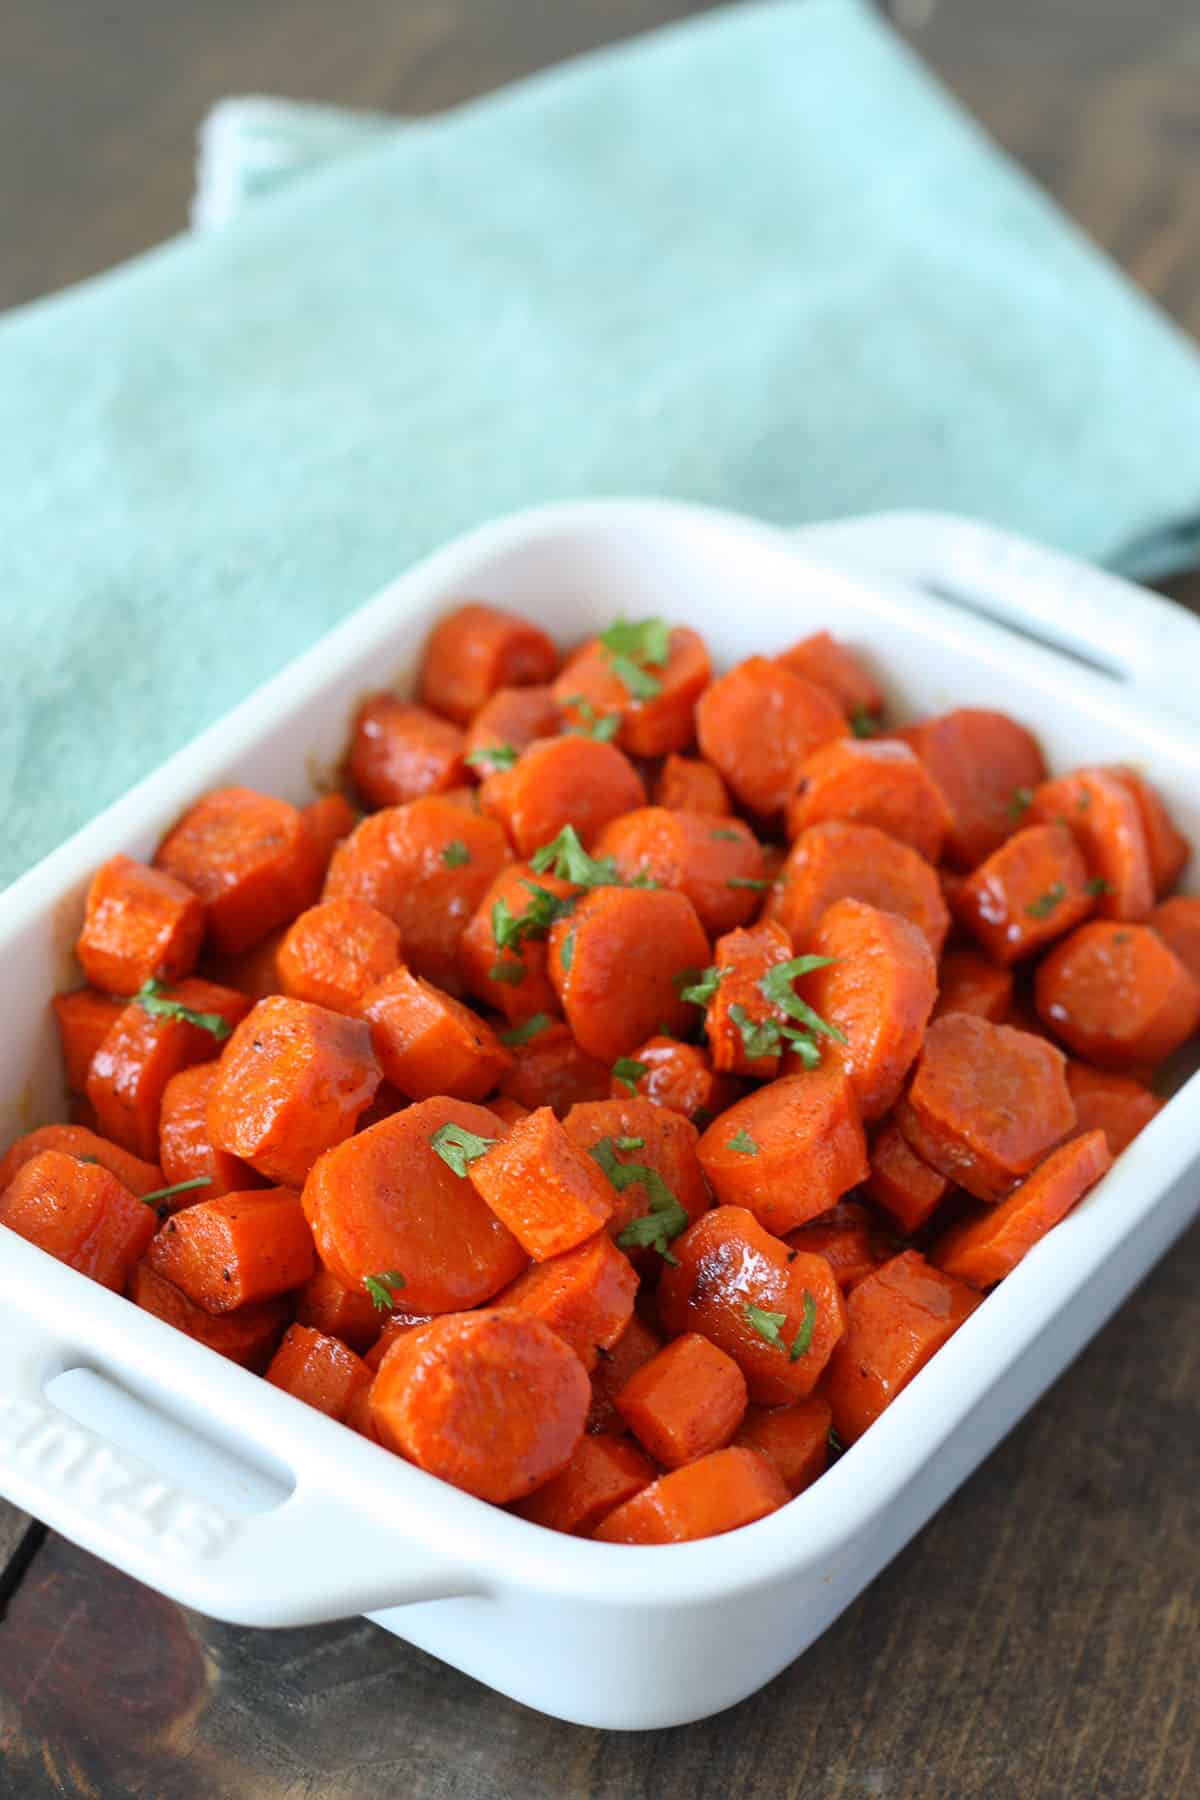 Cut honeyed carrots into coins and garnish with green parsley on a white baking dish.